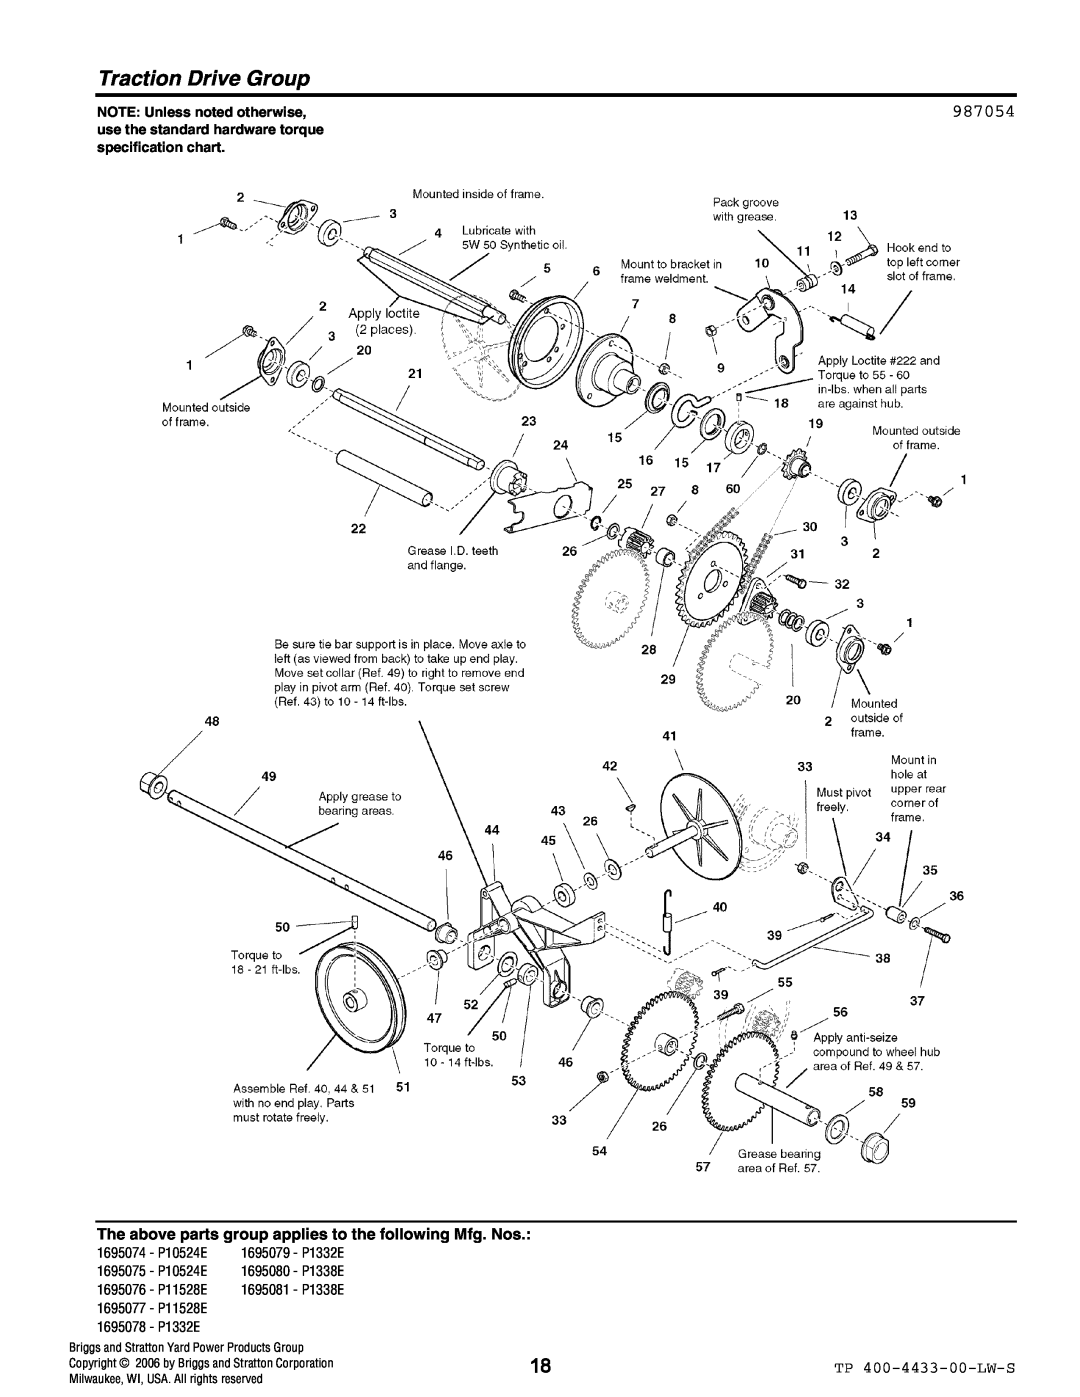 Simplicity 1695078 manual Traction Drive Group, 987054, NOTE Unless noted otherwise, 1695074 - P10524E 1695079 - P1332E 